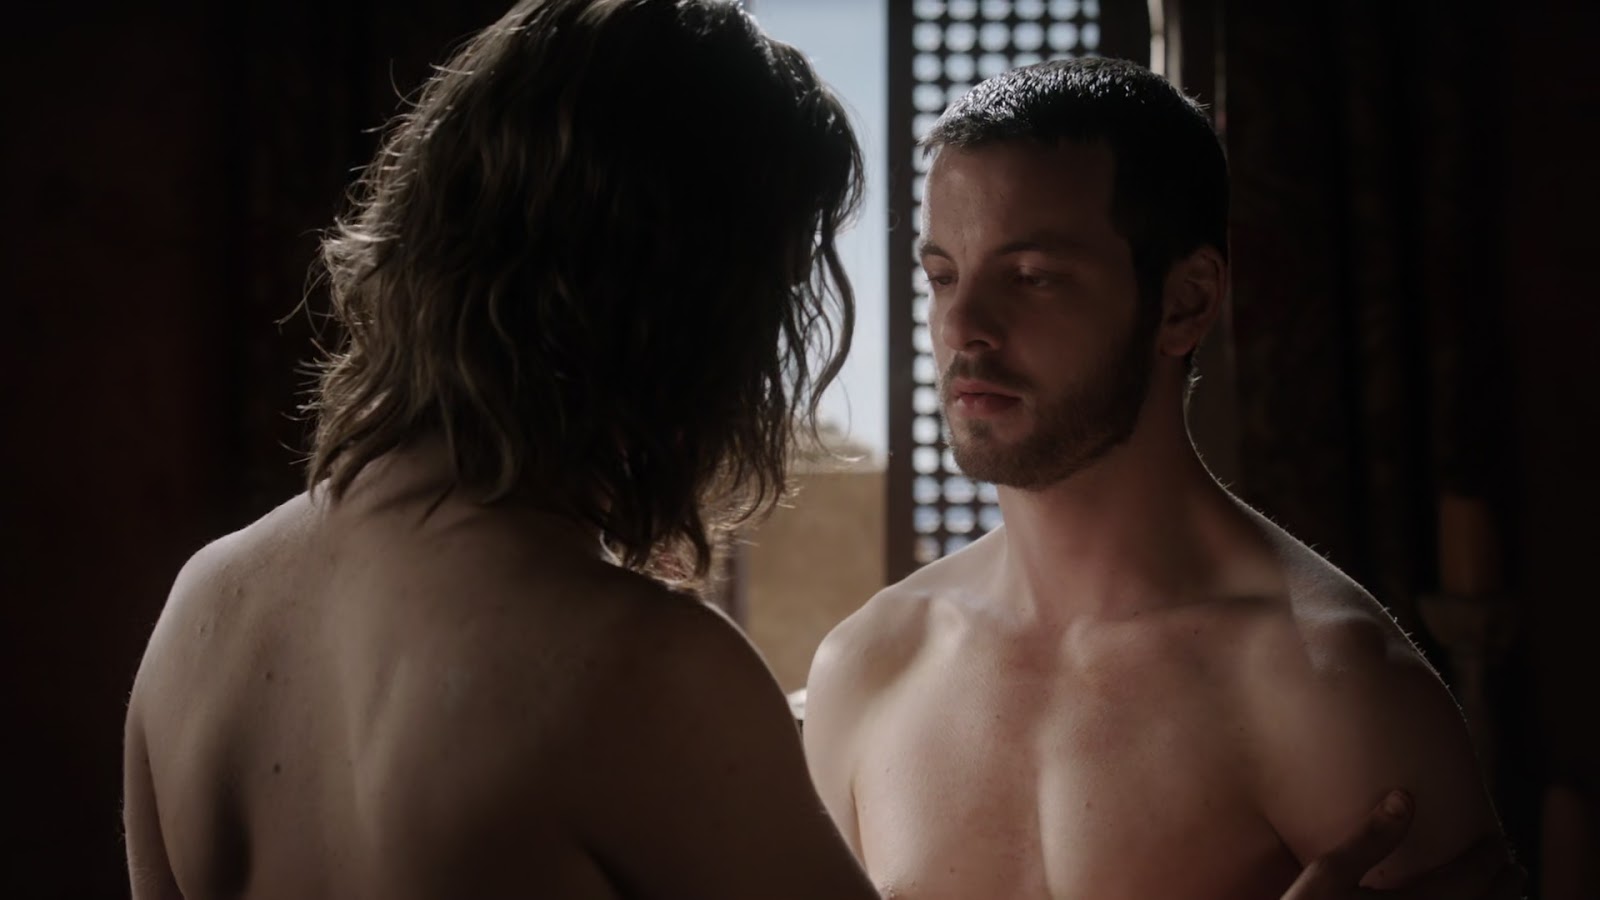 Gethin Anthony and Finn Jones shirtless in Game Of Thrones 1-05 "The W...